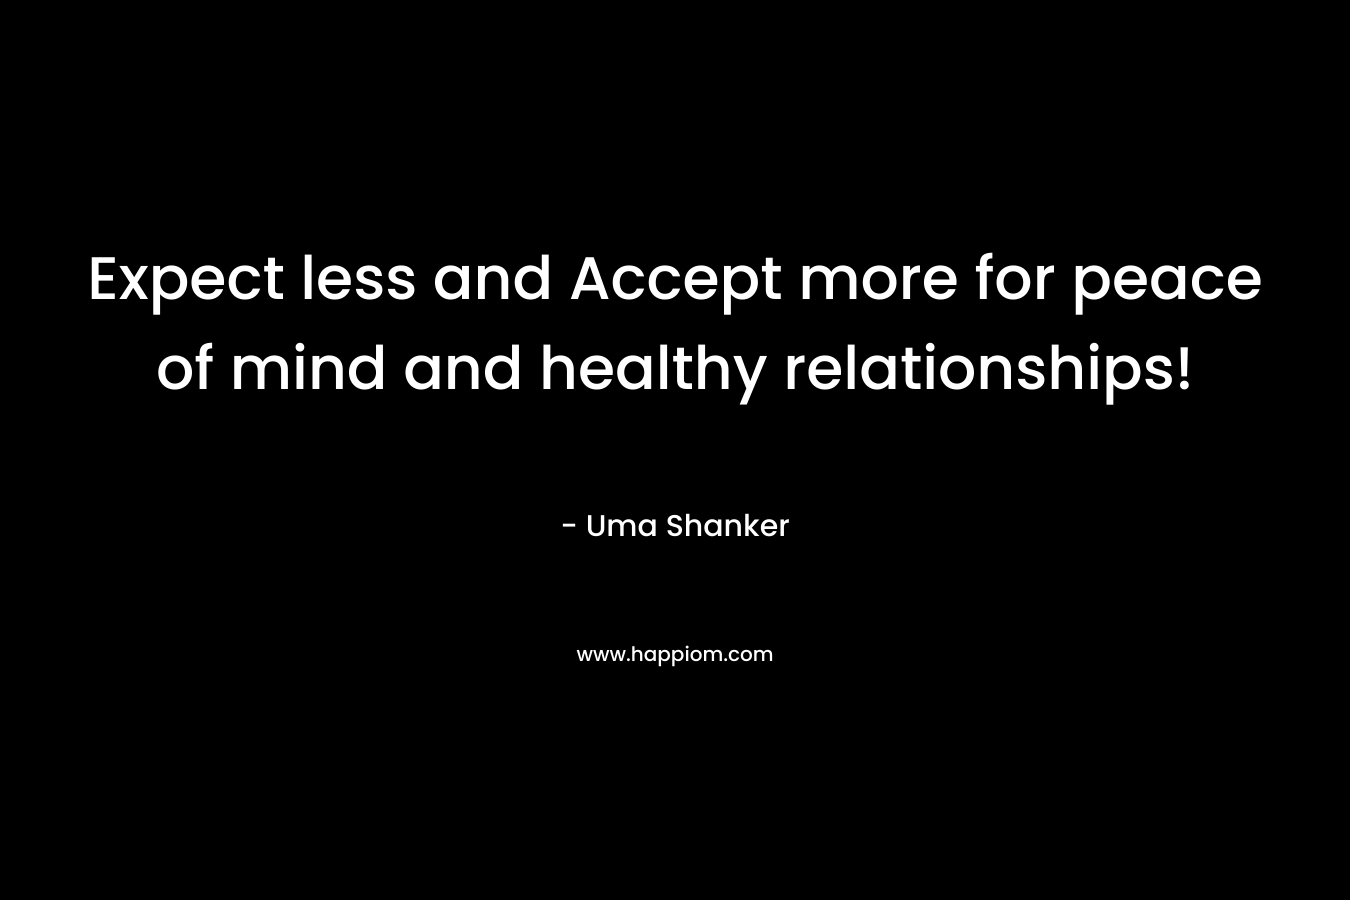 Expect less and Accept more for peace of mind and healthy relationships!